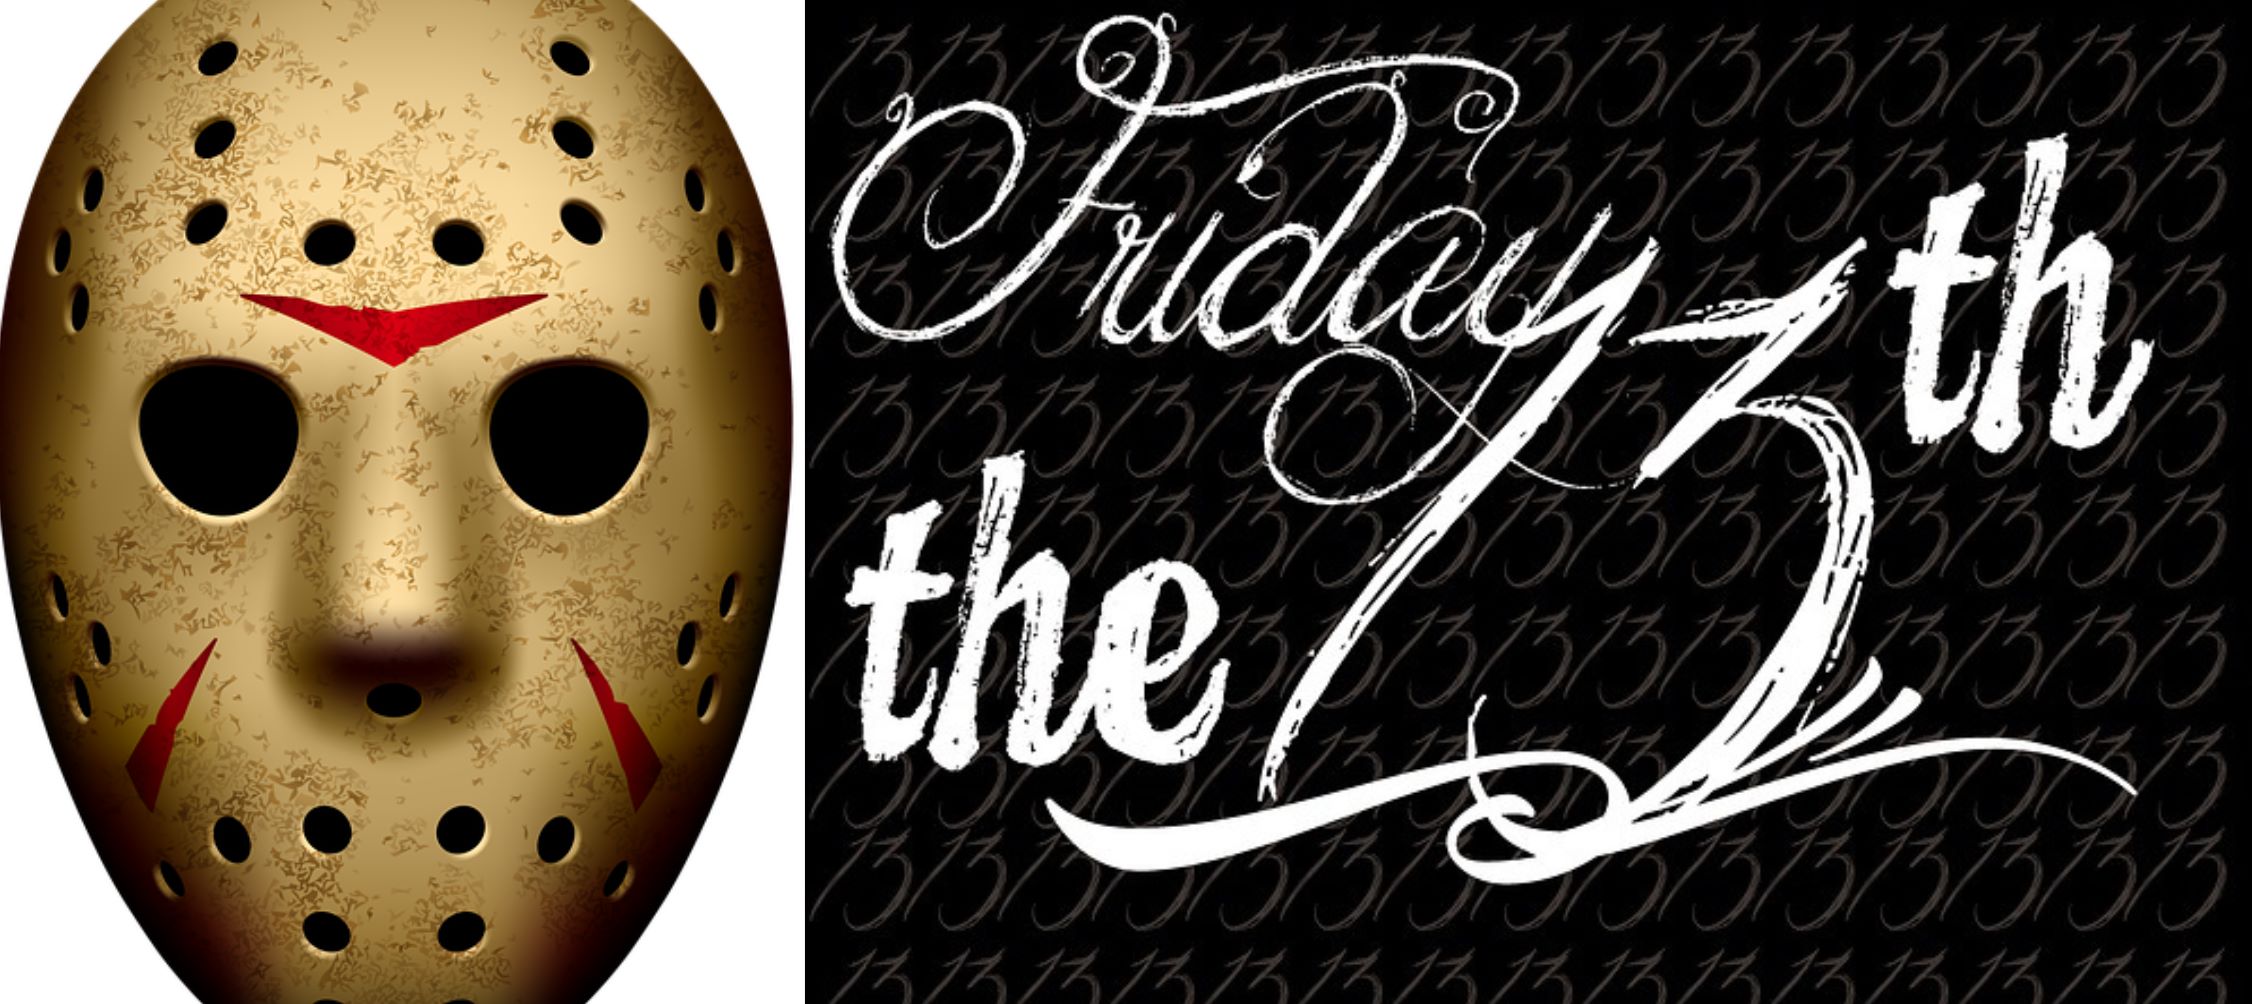 Friday the 13th: Superstition, Suspense, and Jason Voorhees